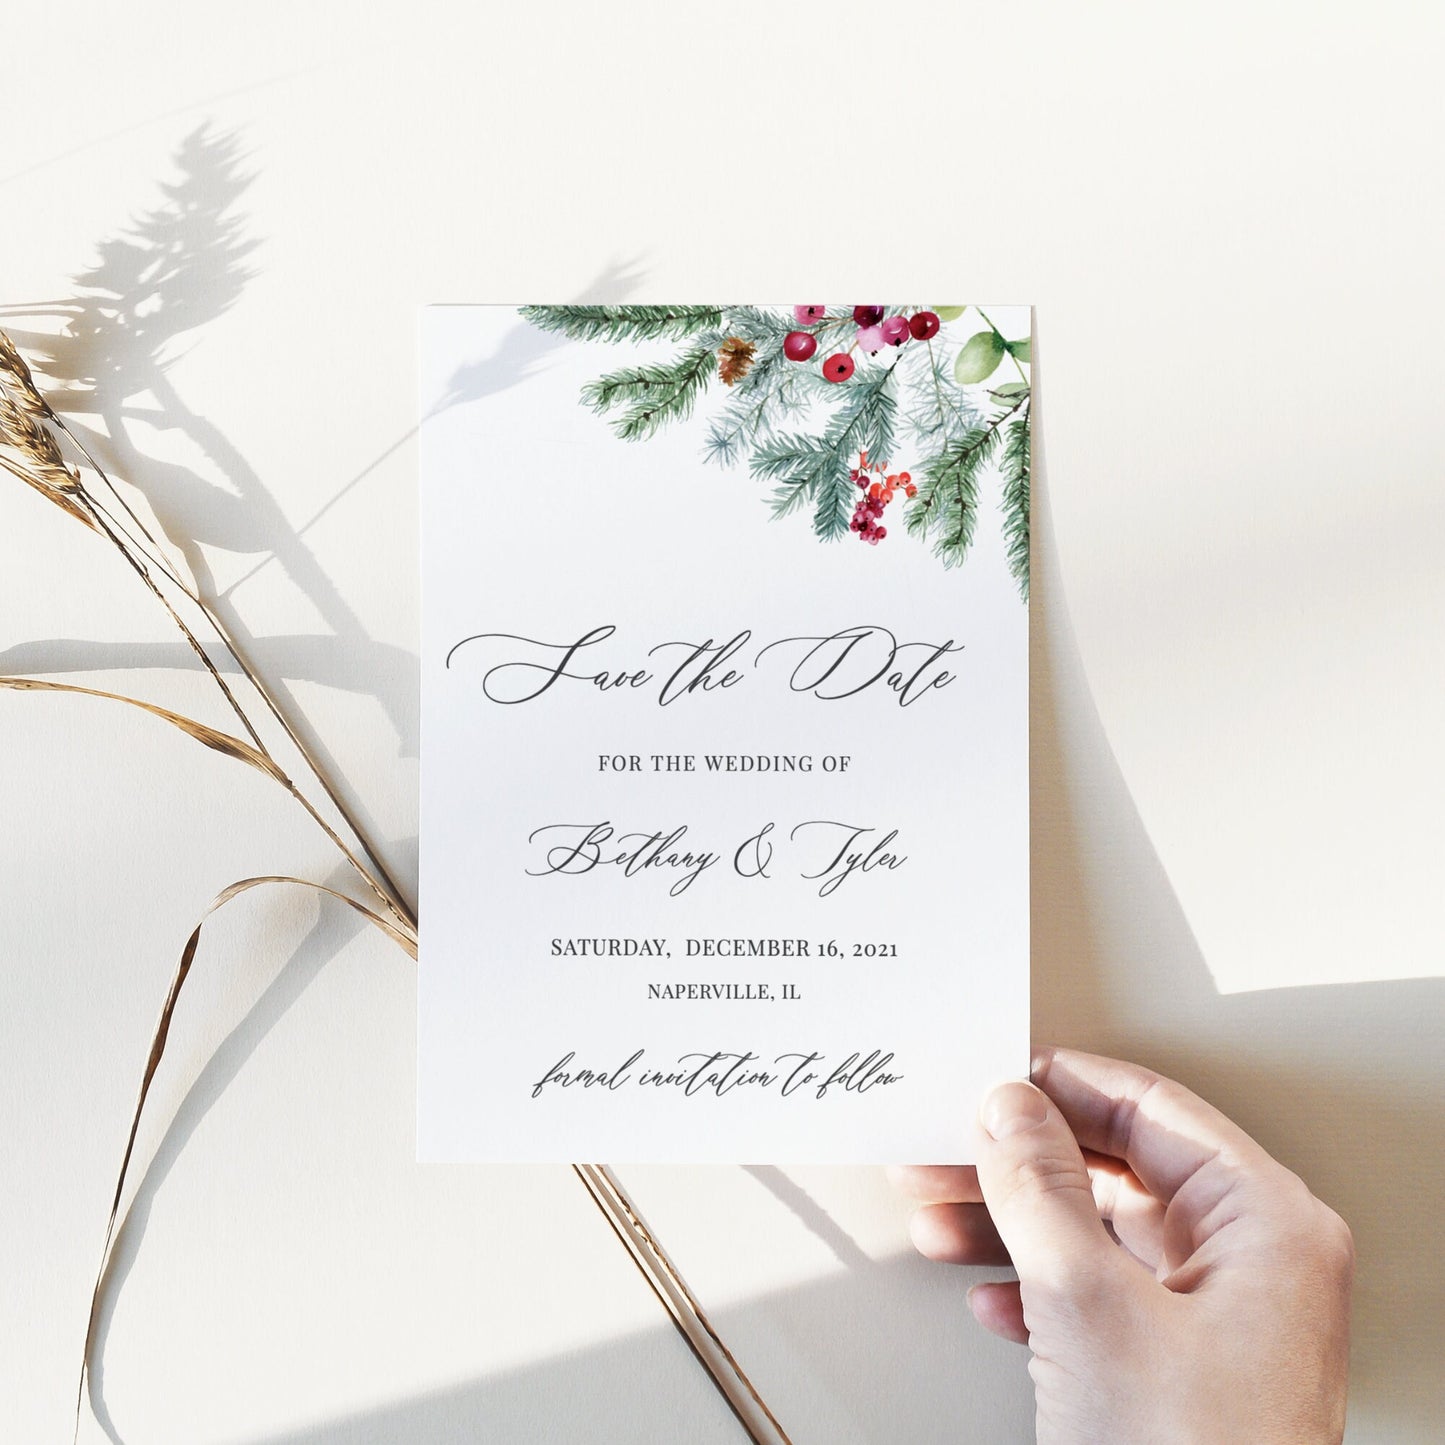 Editable Winter Pine Save the Date Holiday Save the Date Cards Wedding Announcement Text Digital Template